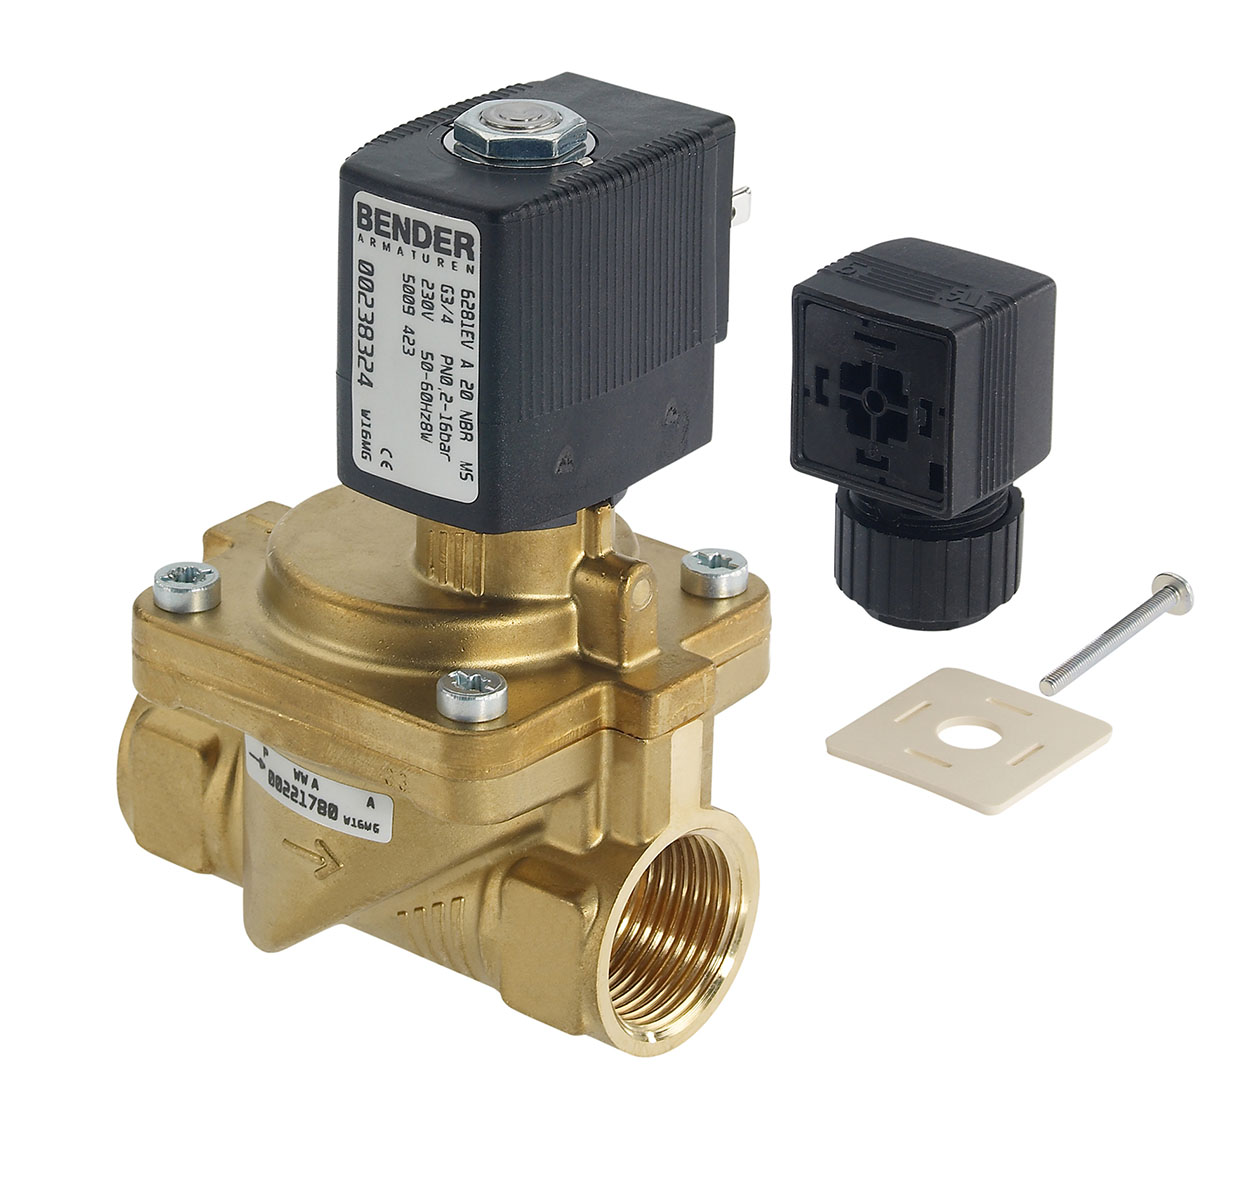 5009405 - 2/2 way solenoid valve normally closed for fluids and compressed air Type 3; female thread